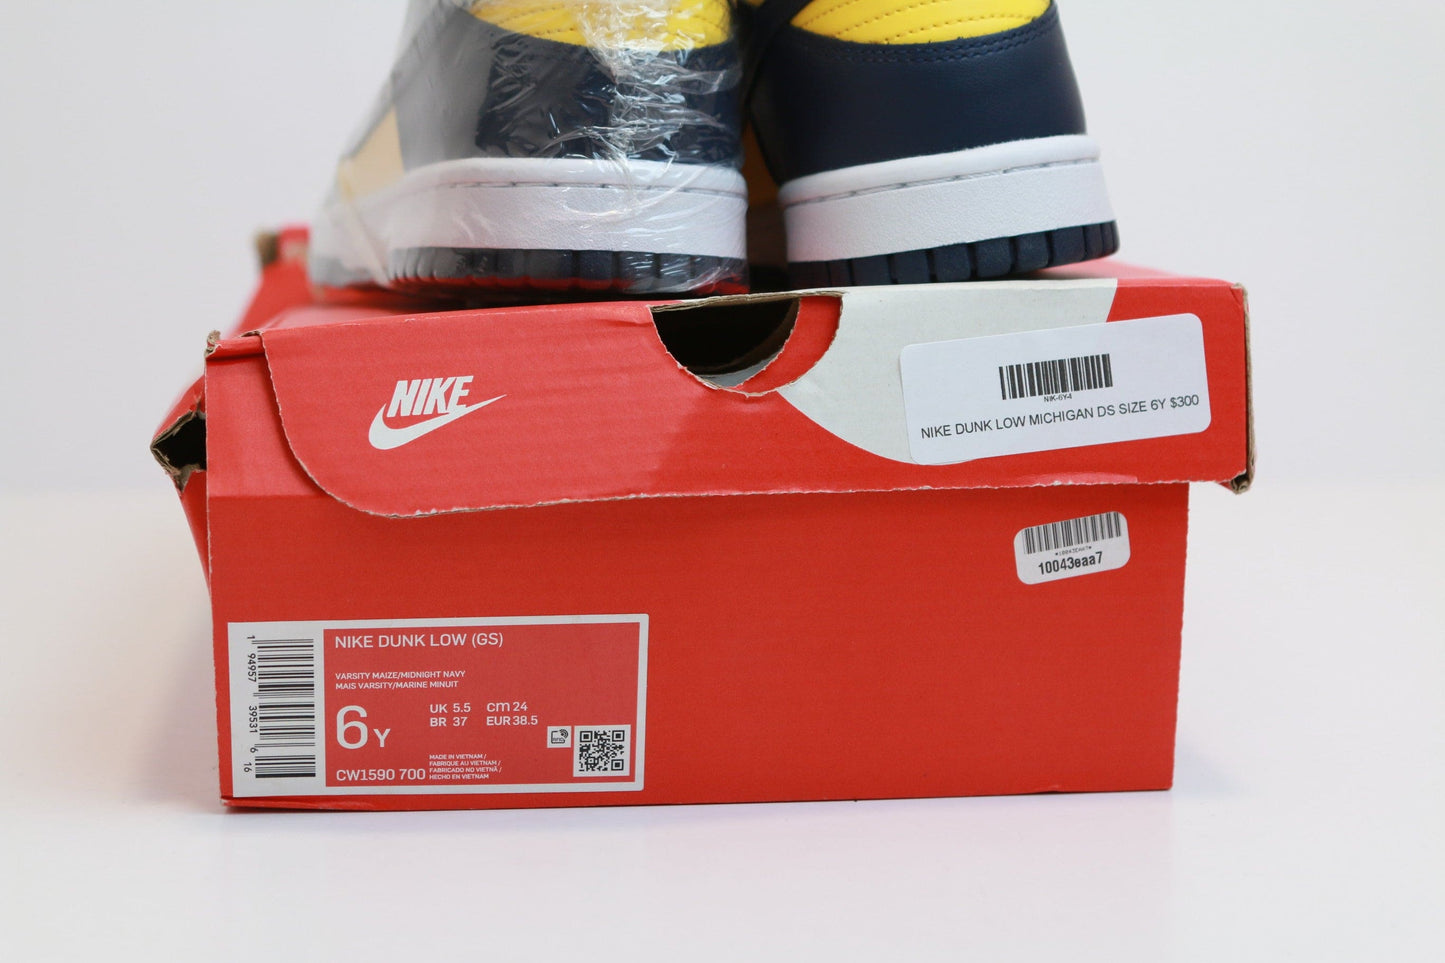 NIKE DUNK LOW MICHIGAN DS SIZE 6Y